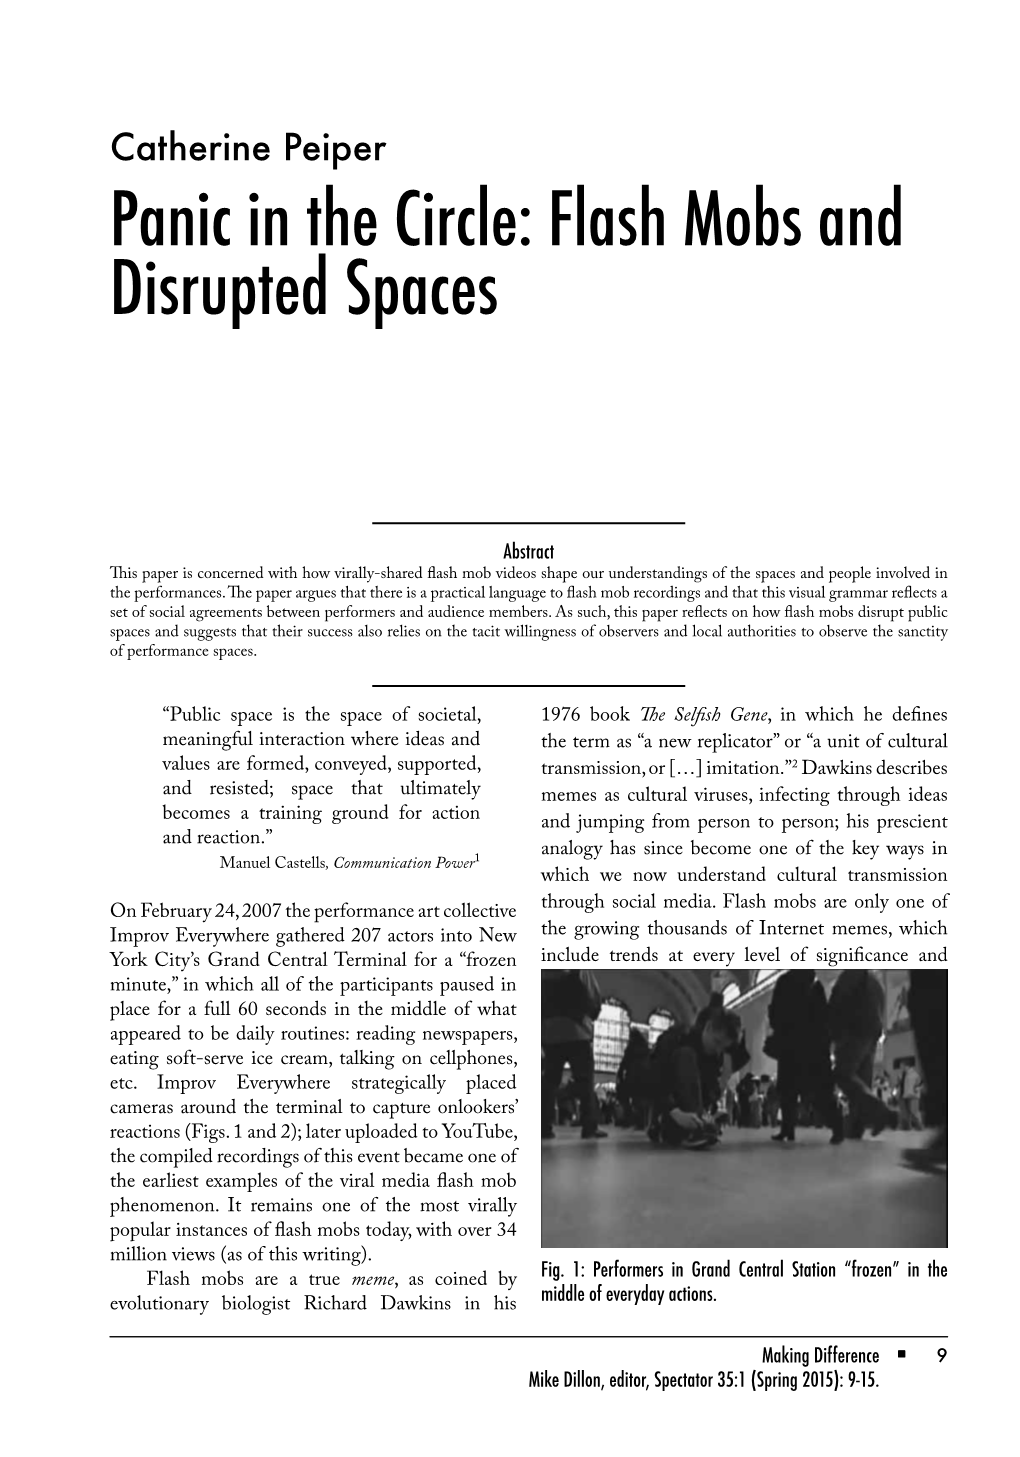 Panic in the Circle: Flash Mobs and Disrupted Spaces